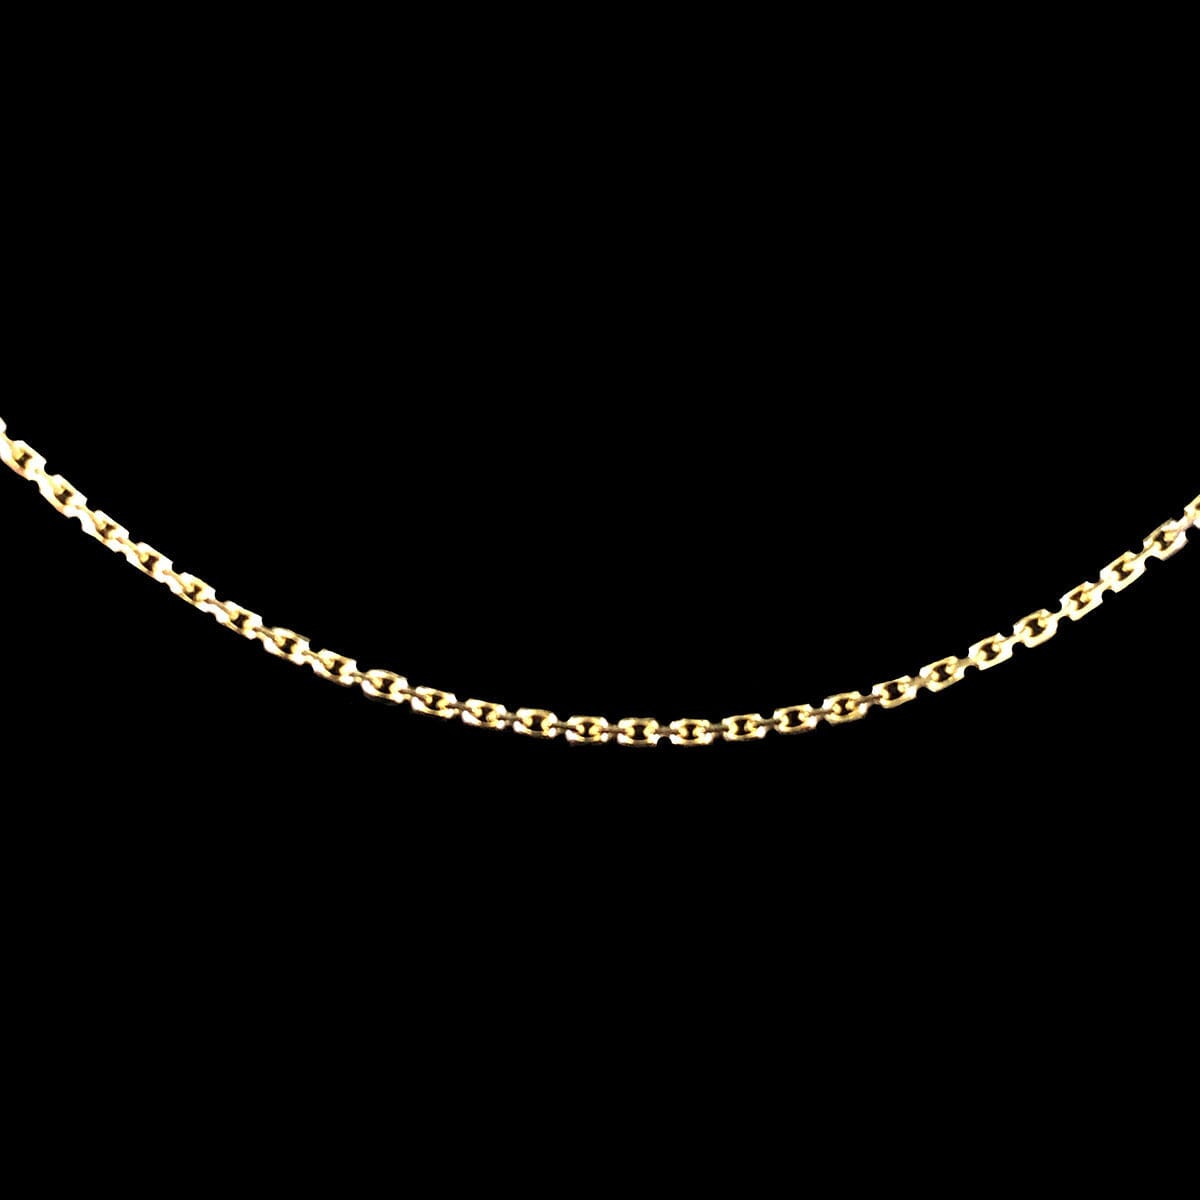 Great Lakes Boutique 14k Yellow Gold Diamond Cut Cable Necklace